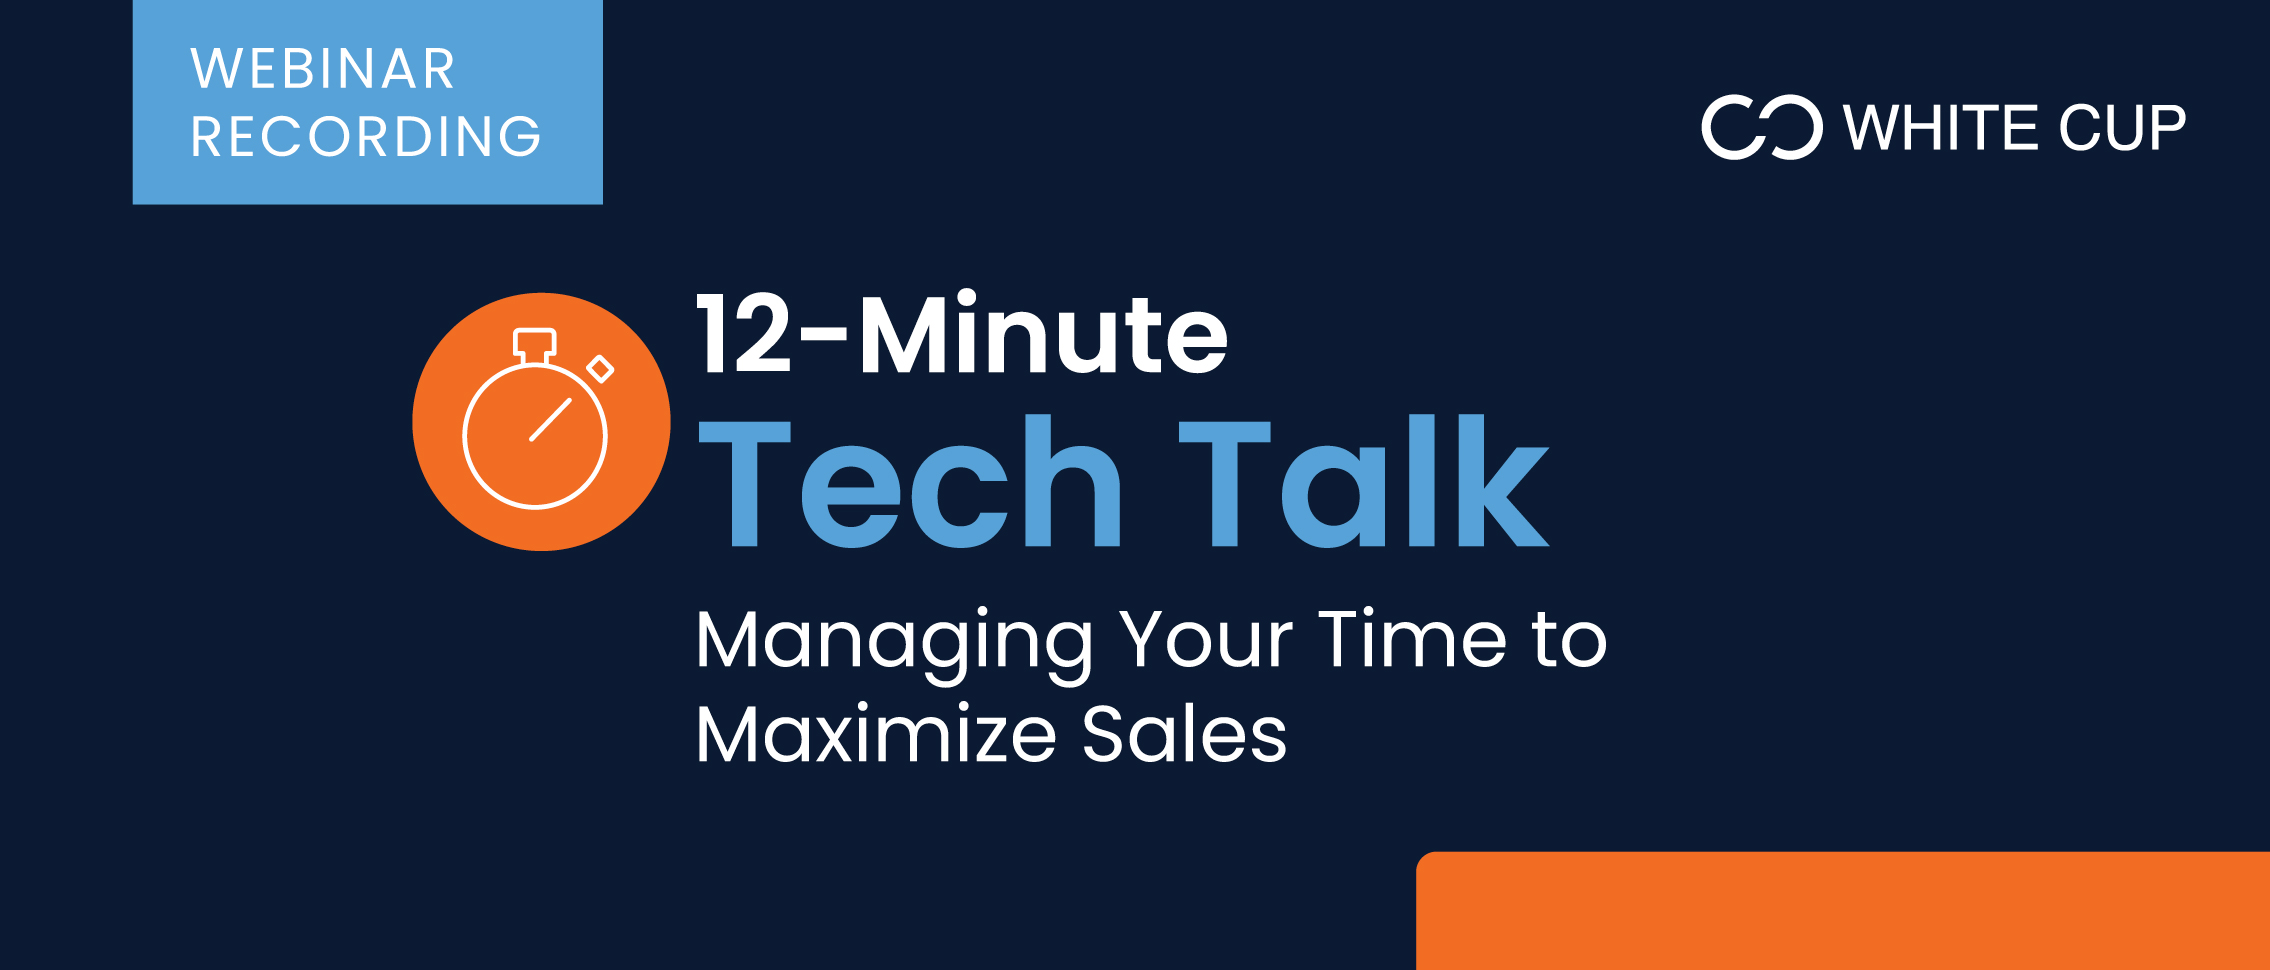 Managing Your Time to Maximize Sales webinar recording